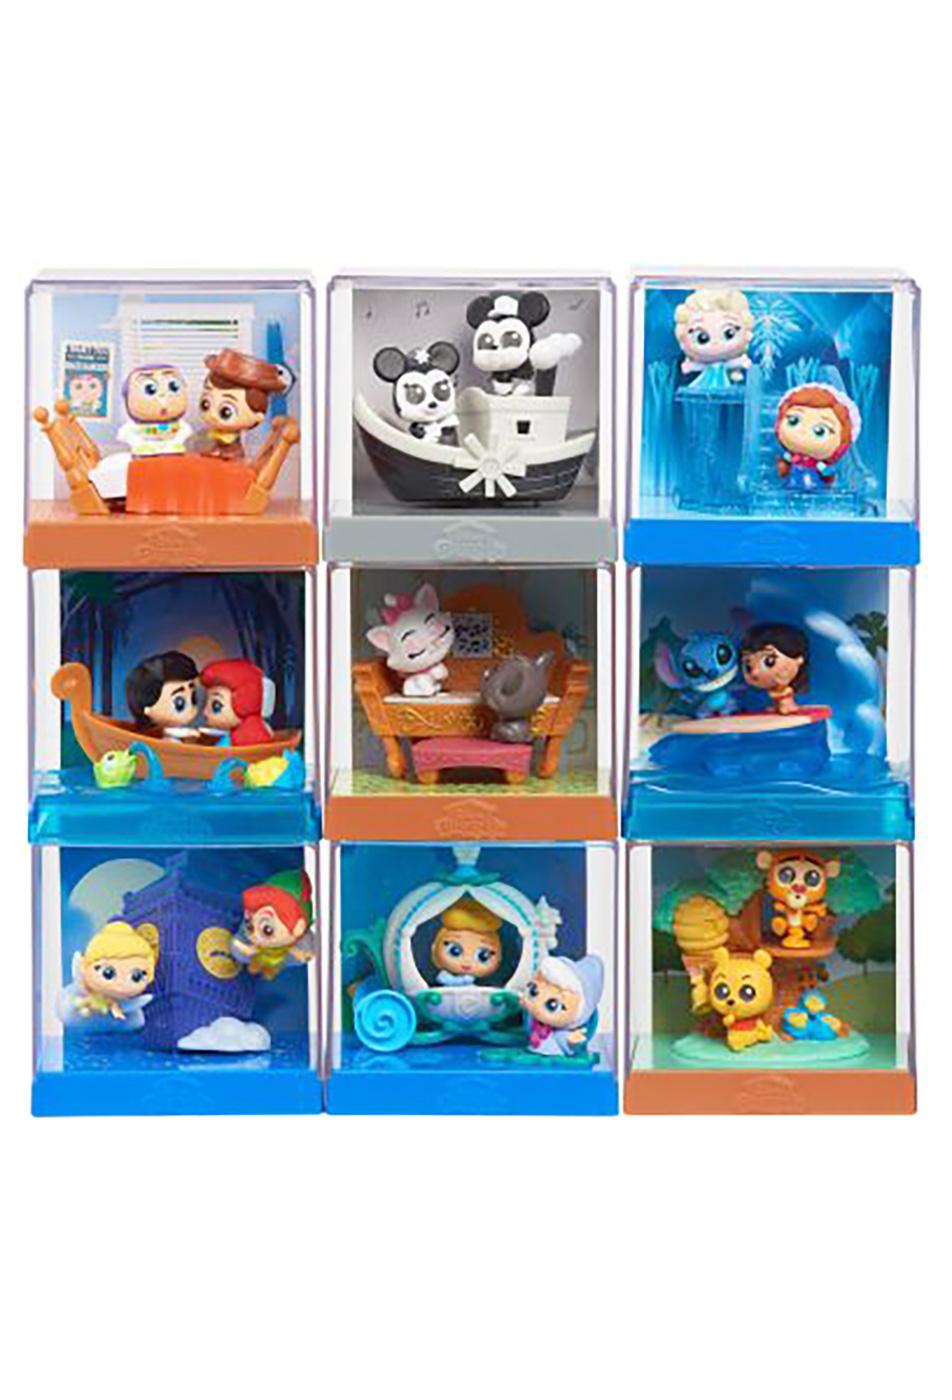 Just Play Disney Doorables Movie Moments - Shop Action Figures & Dolls at  H-E-B